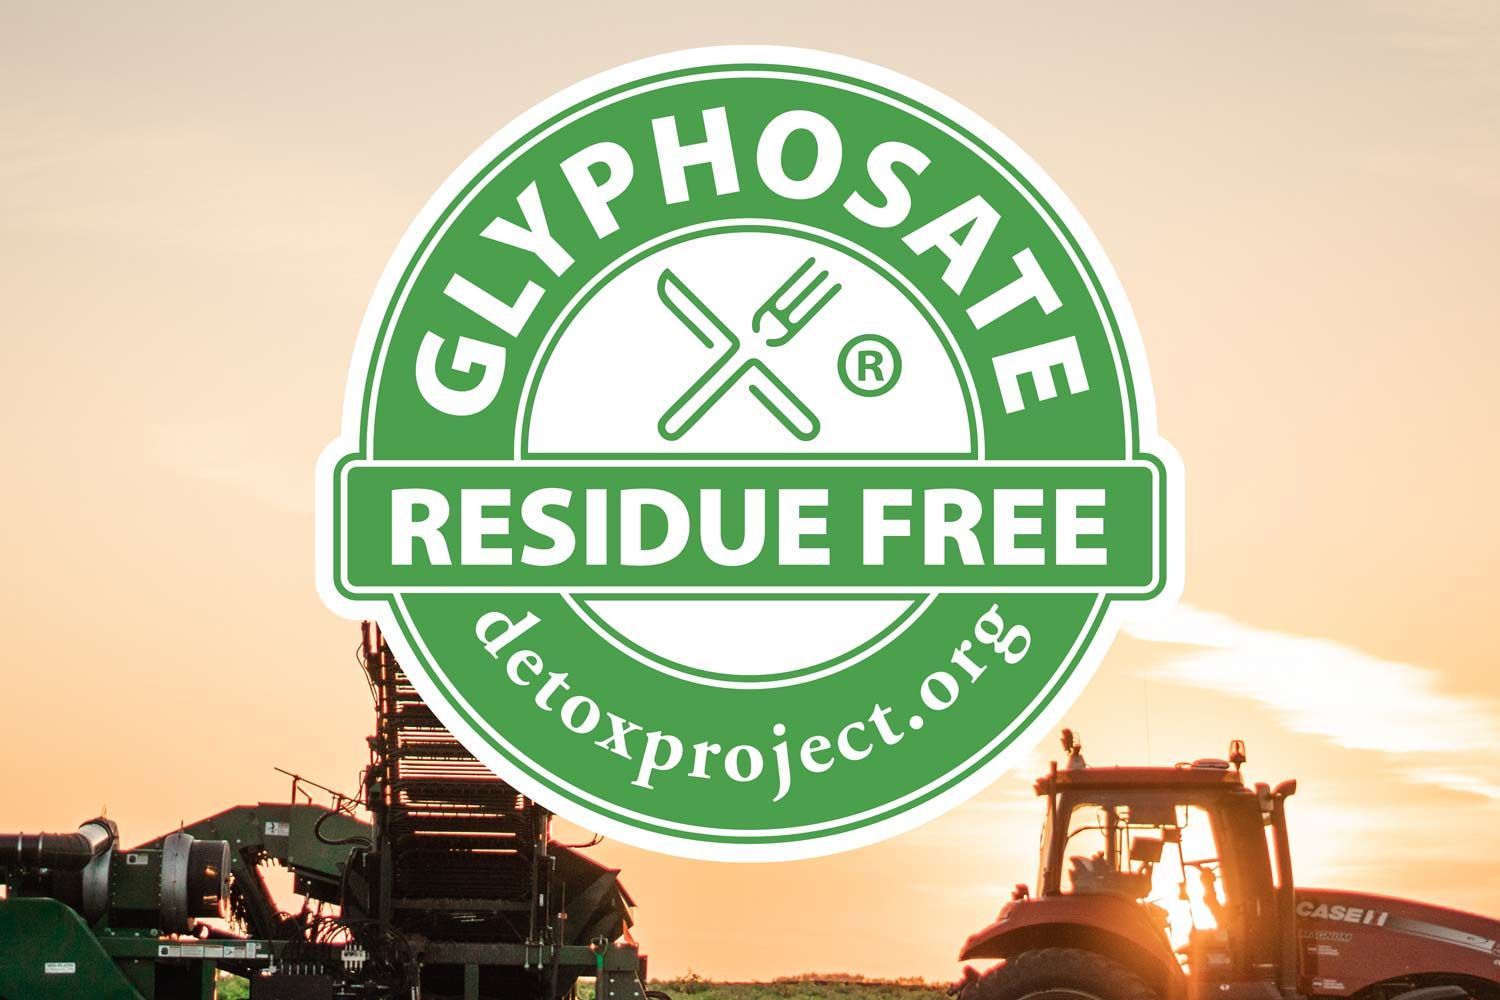 MSPrebiotic Resistant Potato Starch is Certified Glyphosate Residue Free by The Detox Project